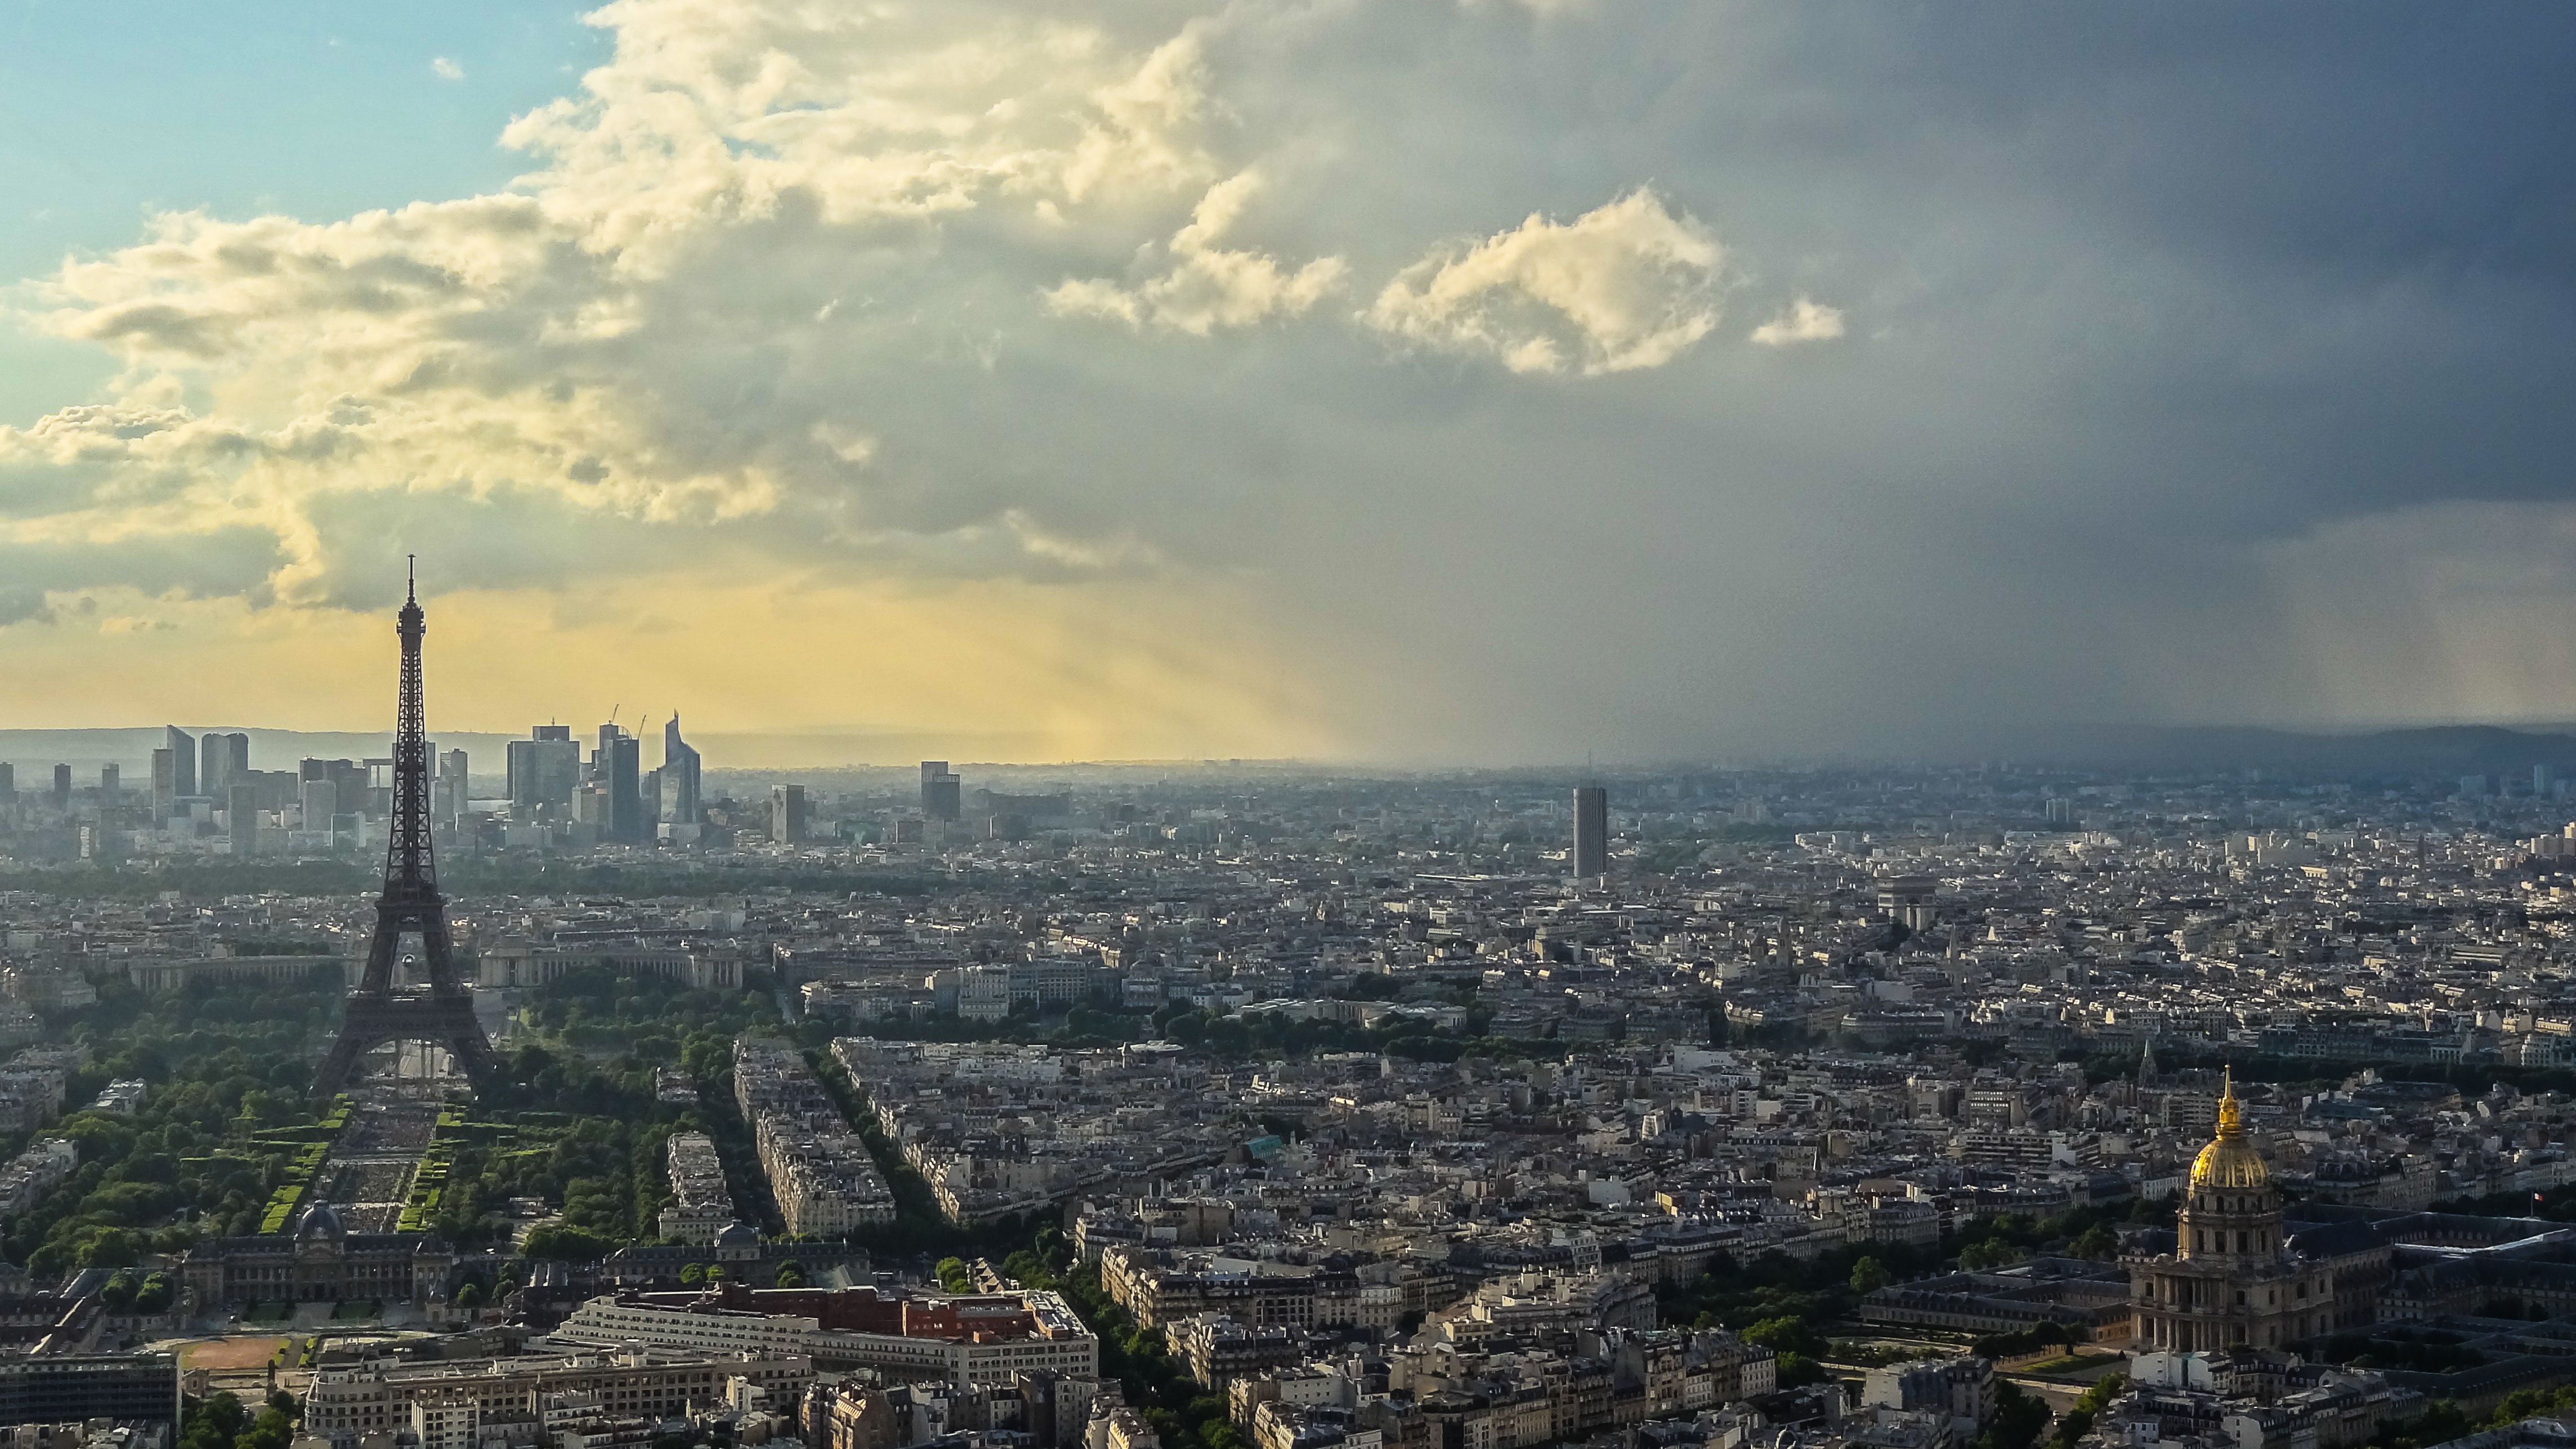 Eiffel Tower from the Tour Montparnasse July 14 2012 n3